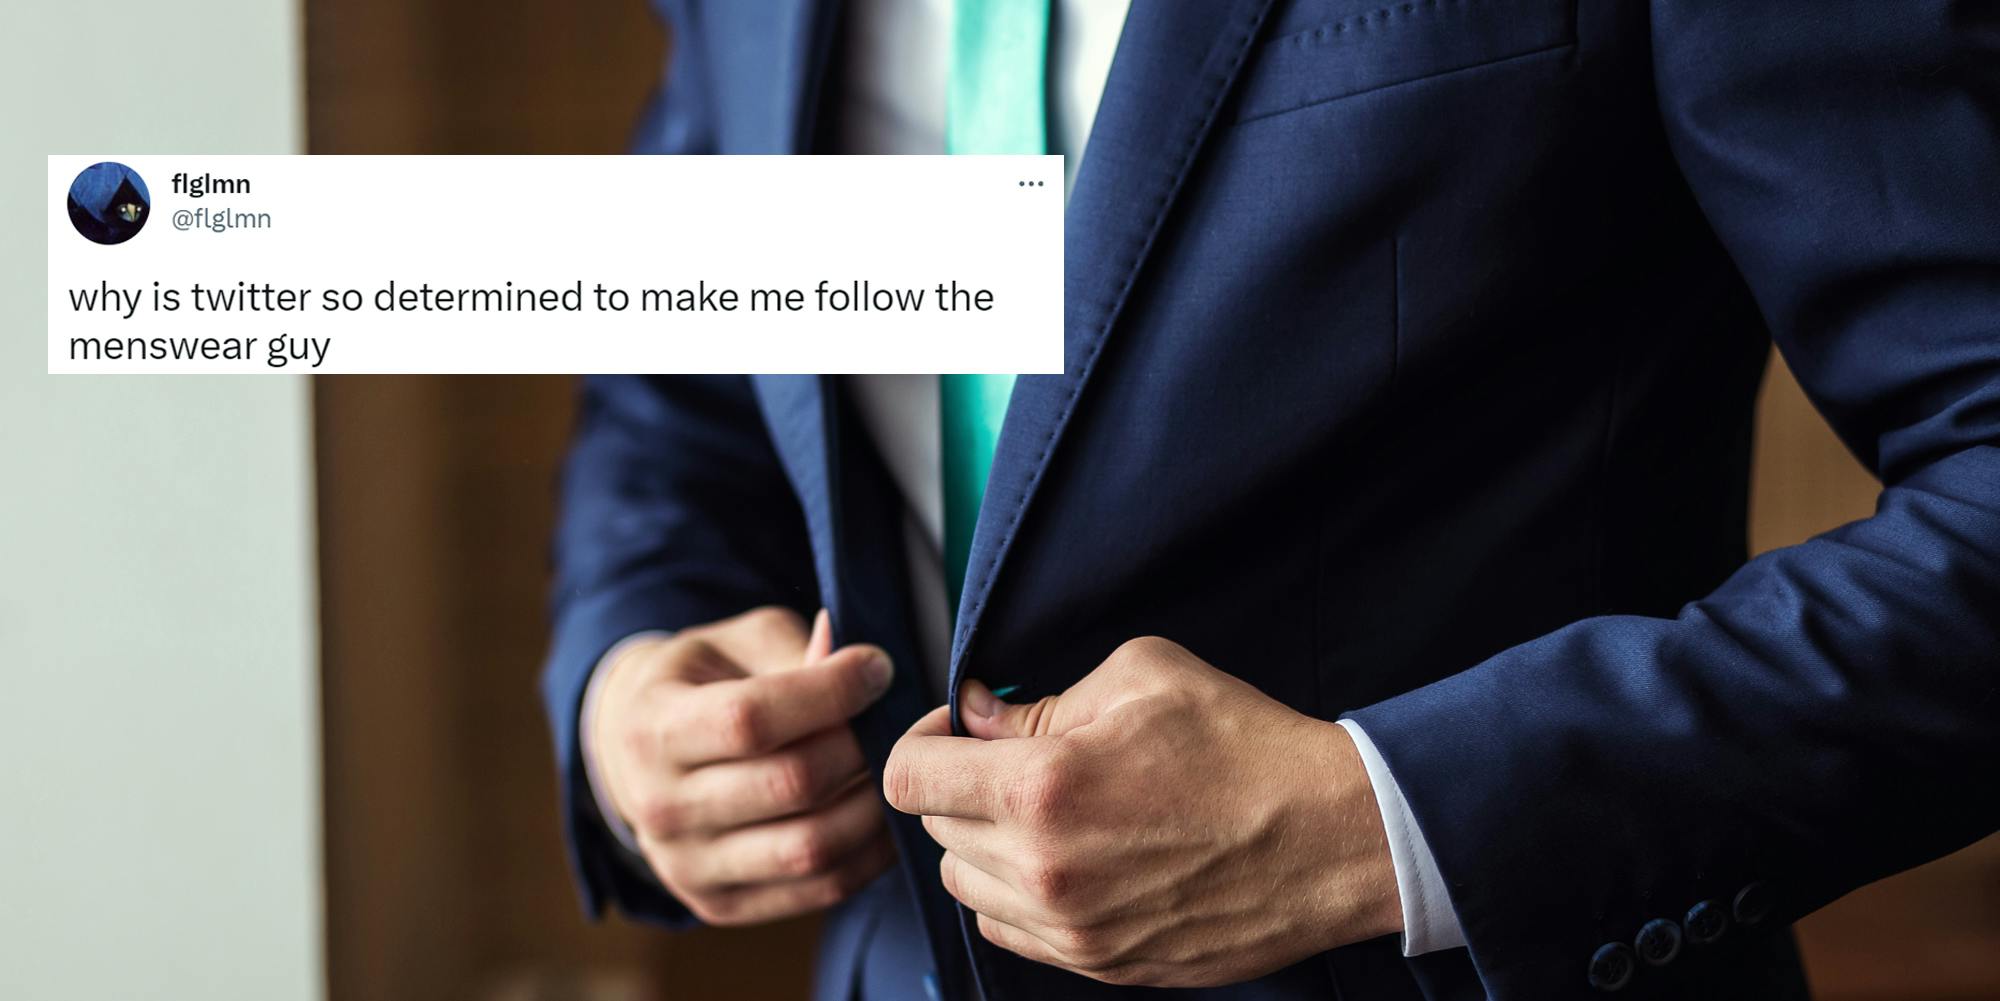 Male fashion model in blue suit with Tweet by @flglmn at left "why is twitter so determined to make me follow the menswear guy"